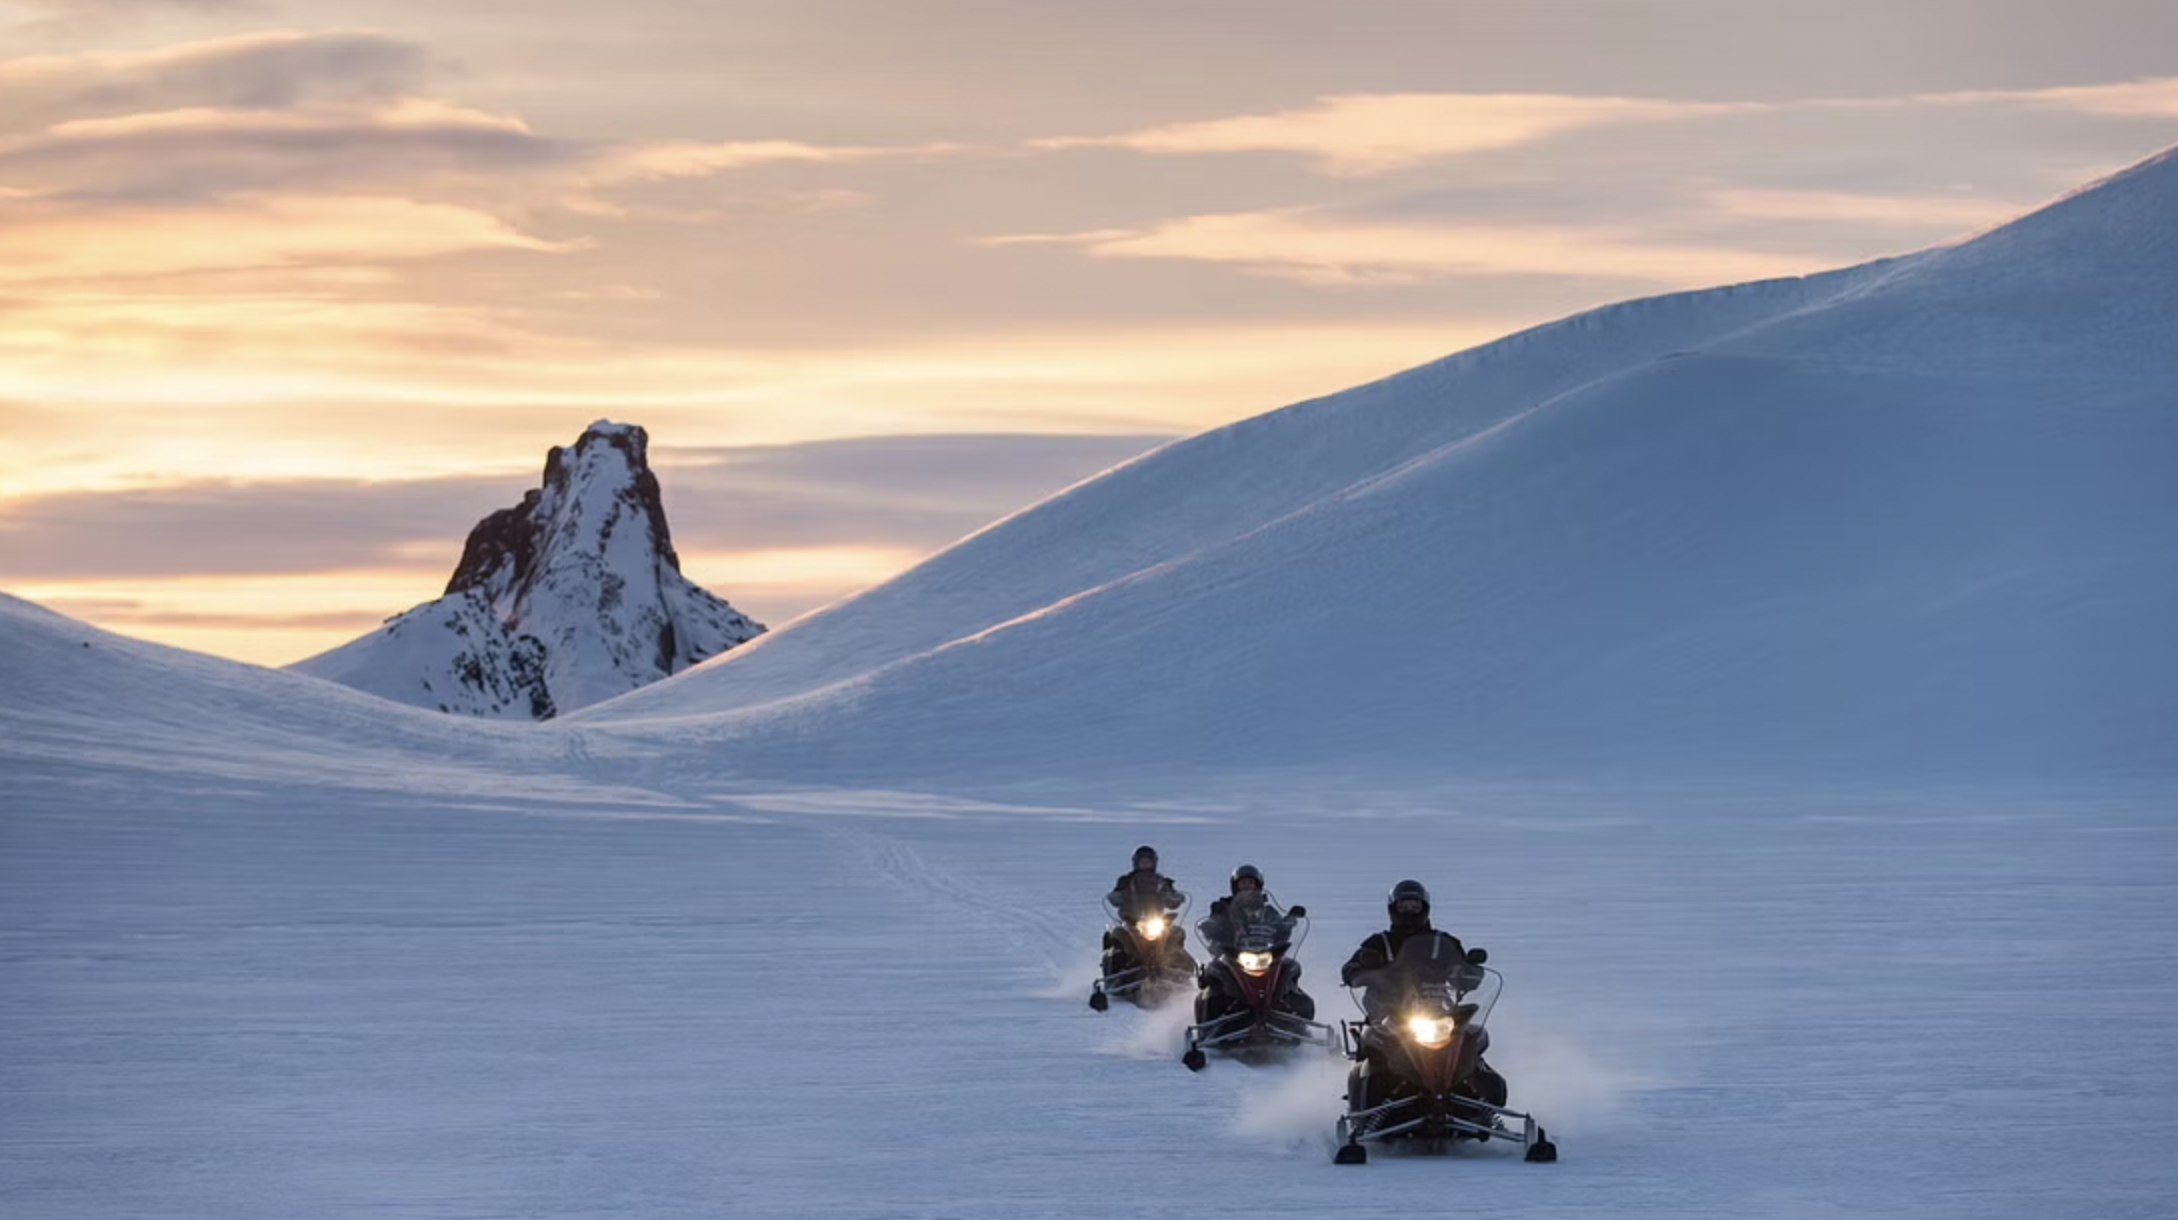 Snowmobiling on the glacier is one of the best attractions in the Golden Circle in Iceland